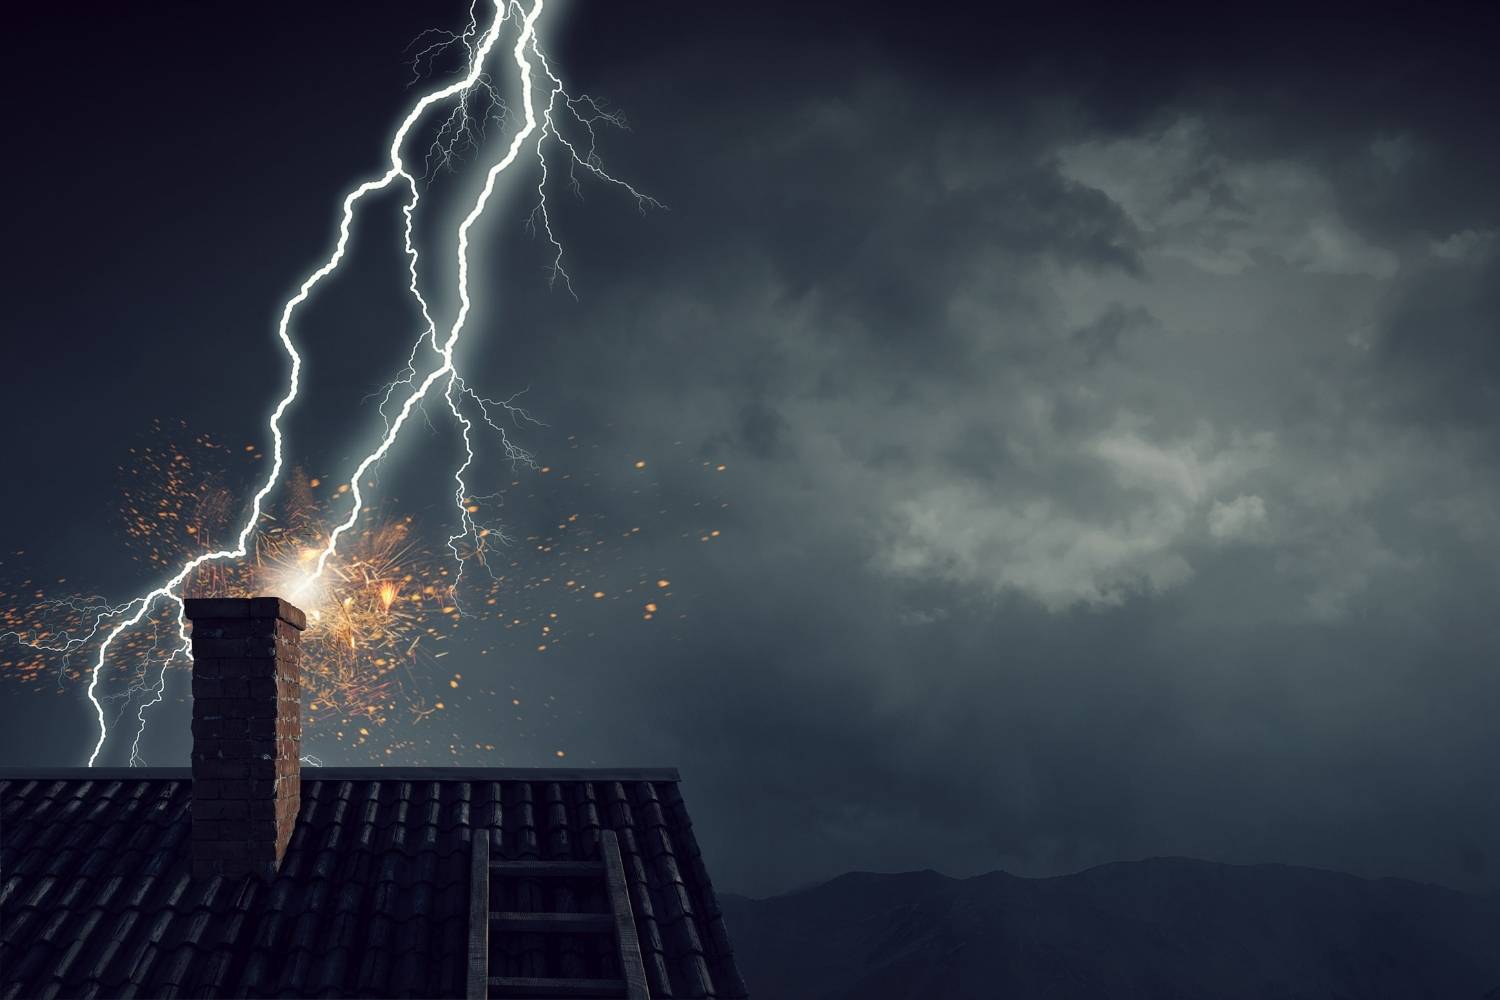 Is your business ready for storm season?